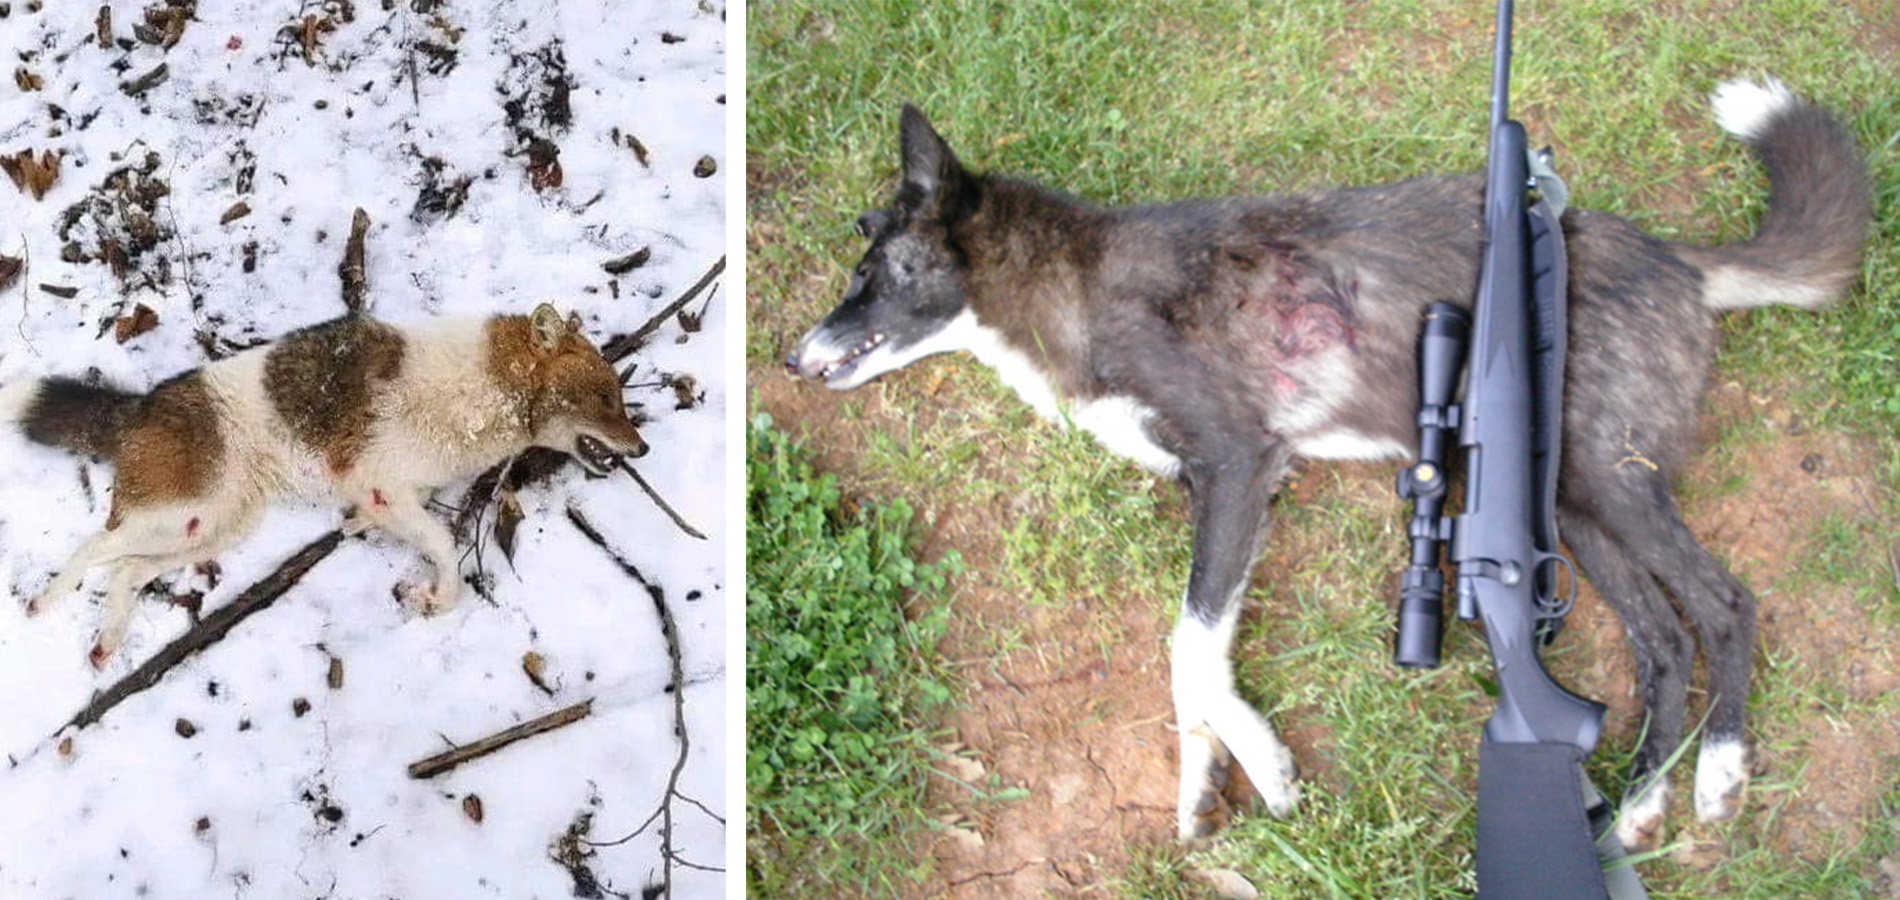 Two different photos of coydogs found on the internet.